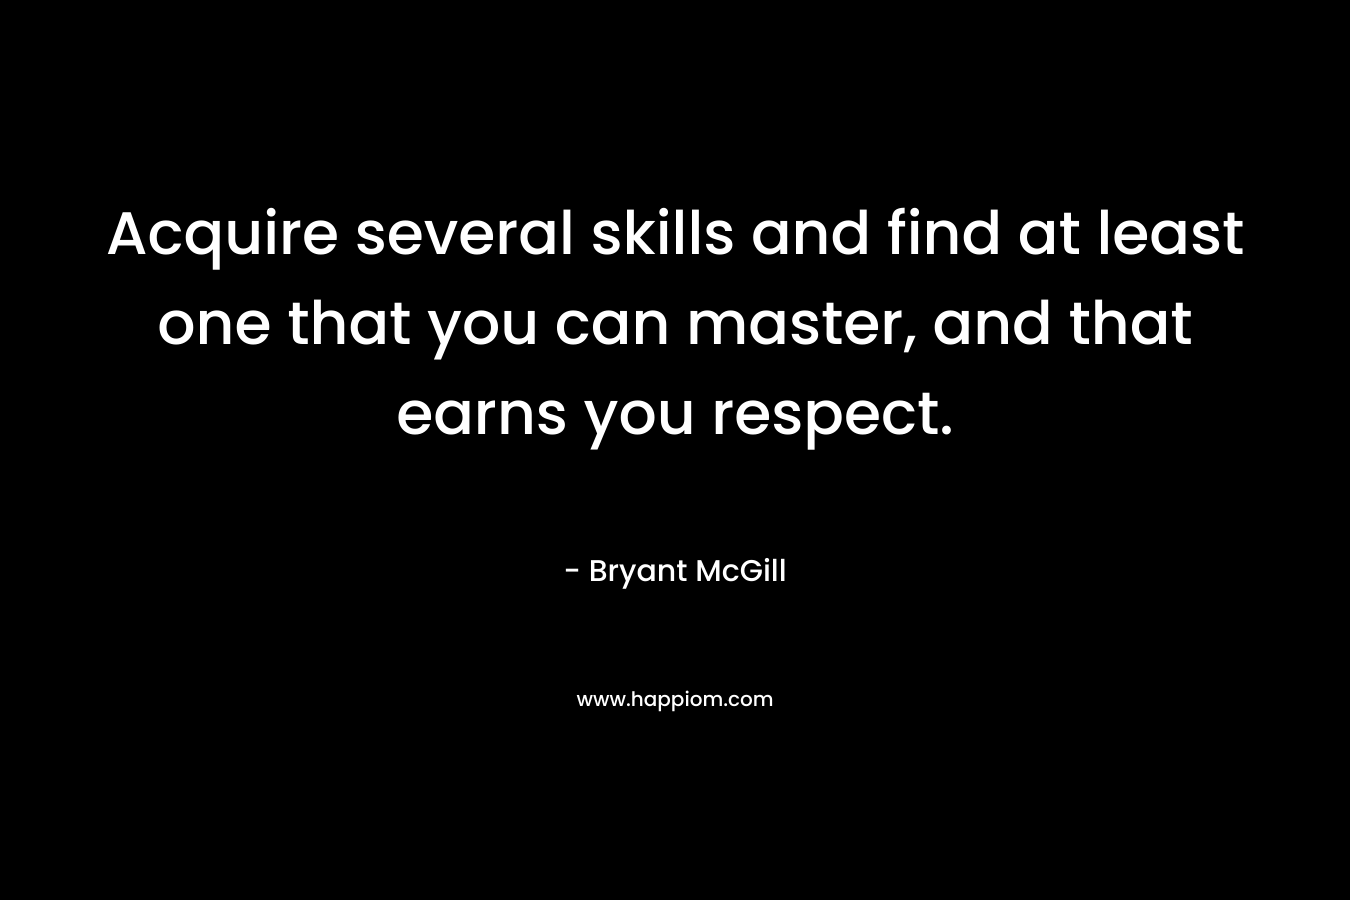 Acquire several skills and find at least one that you can master, and that earns you respect. – Bryant McGill